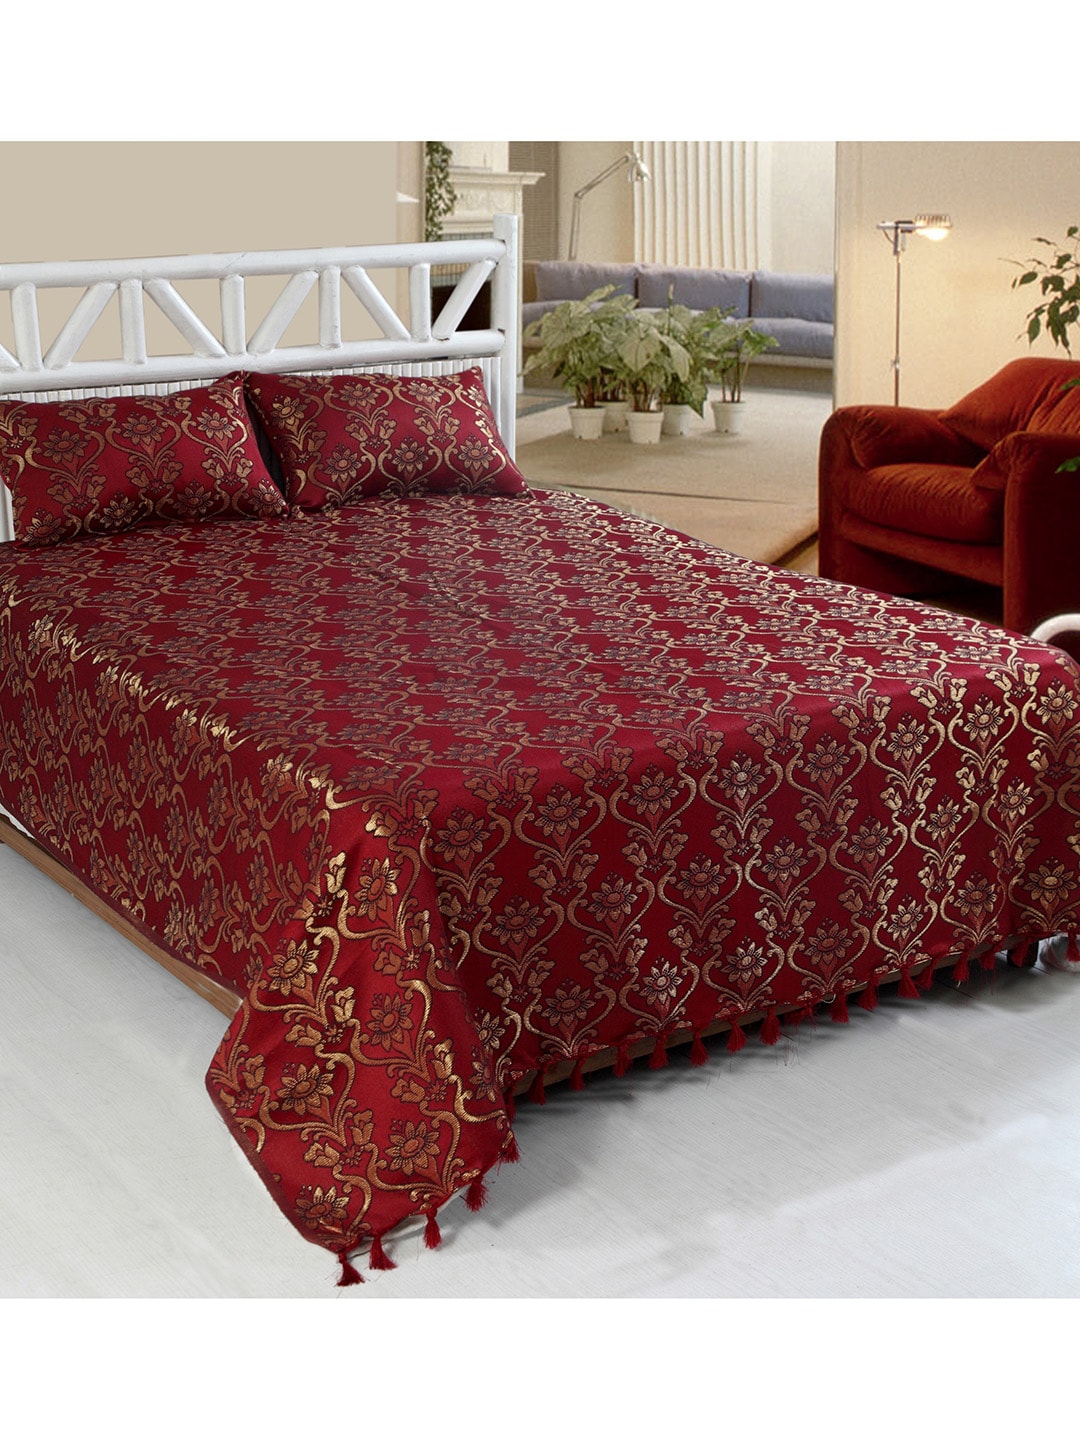 Varde Red & Gold-Colored Woven Design Double King Bedcover With 2 Pillow Covers Price in India